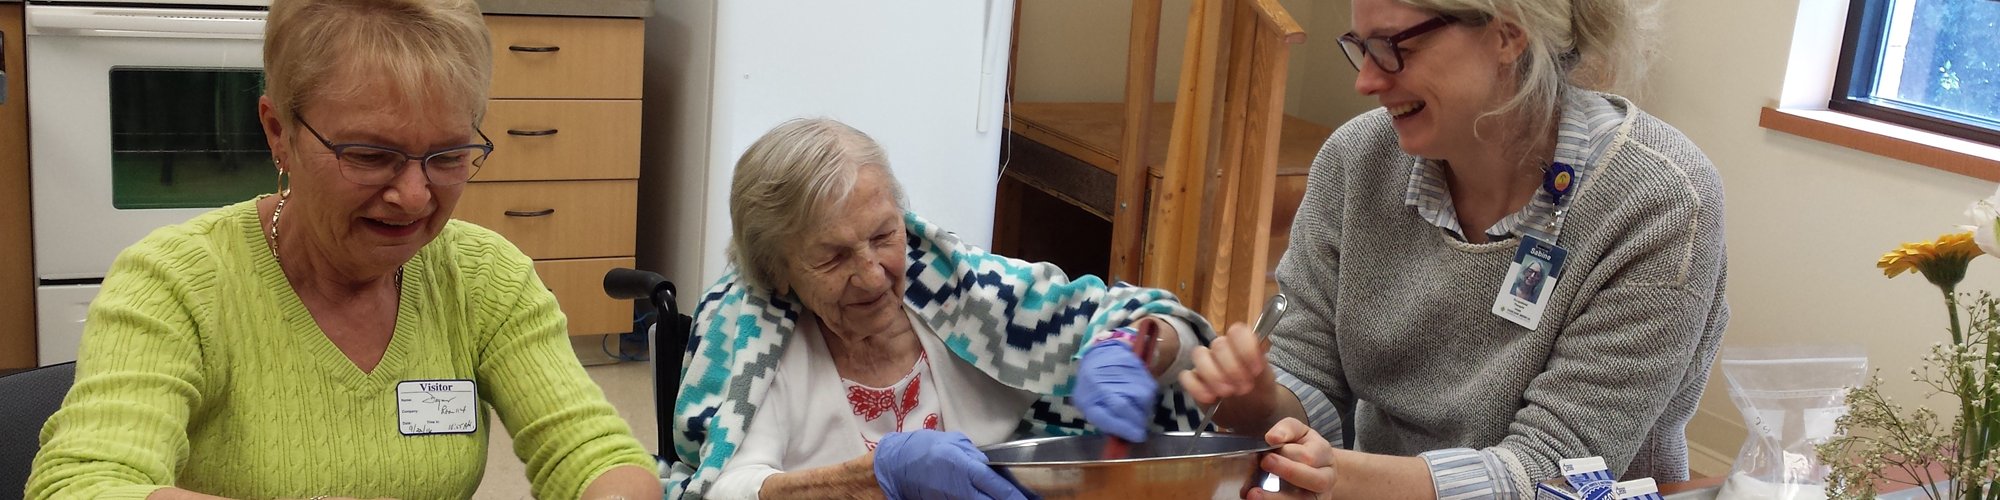 Occupational Therapist Sabine Kaul-Connolly helps a patient with a baking project.